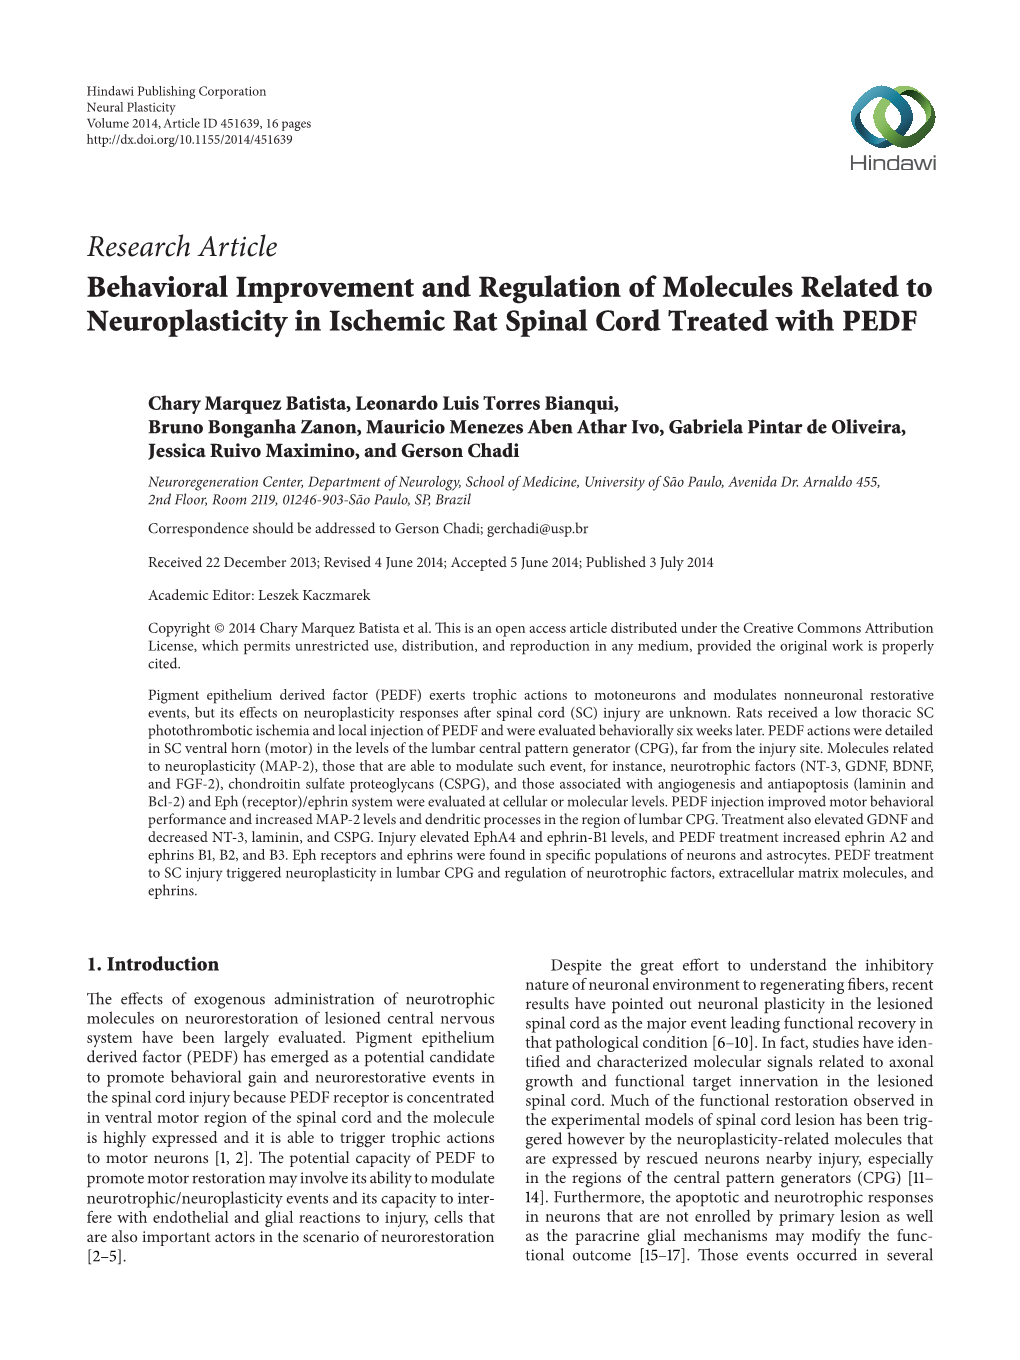 Research Article Behavioral Improvement and Regulation of Molecules Related to Neuroplasticity in Ischemic Rat Spinal Cord Treated with PEDF